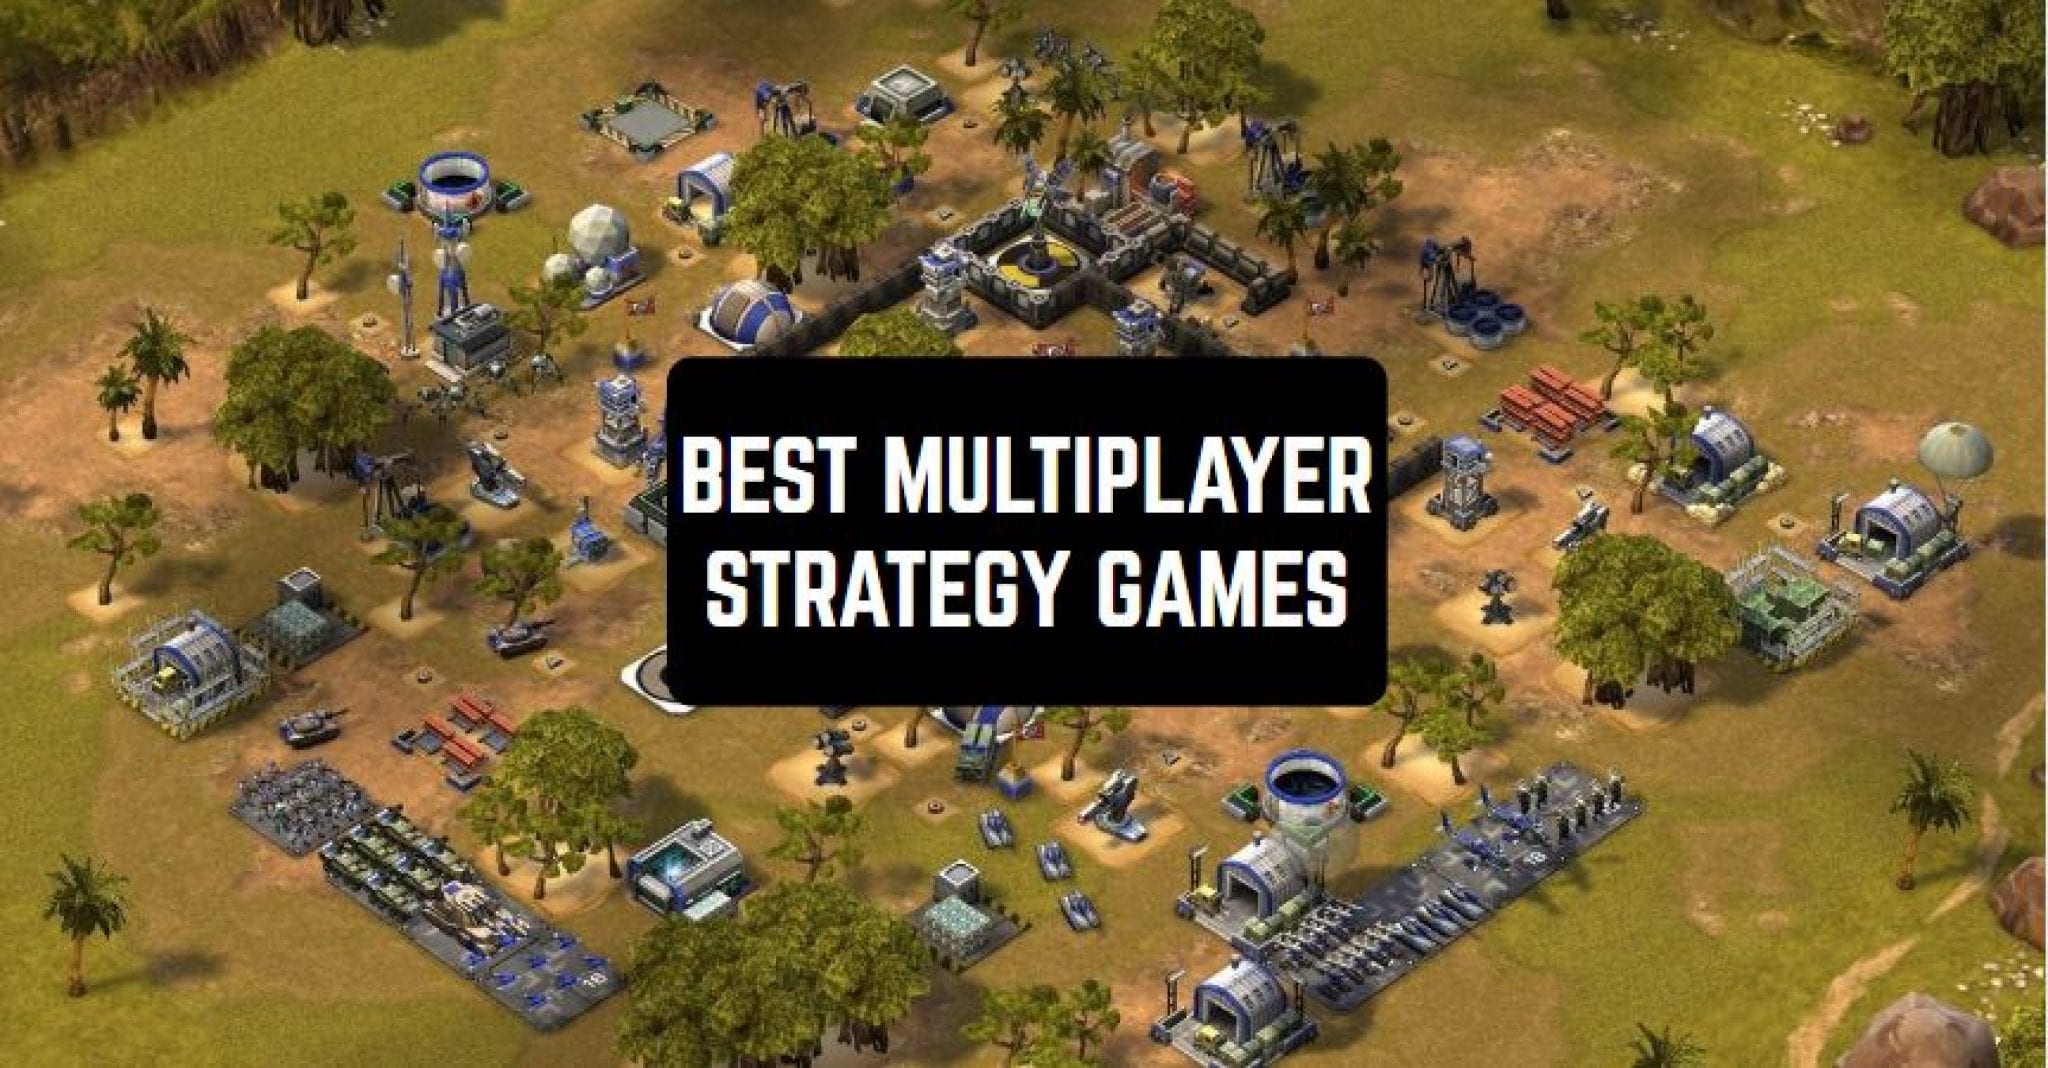 18 Best Multiplayer Strategy Games for Android | Free apps for Android